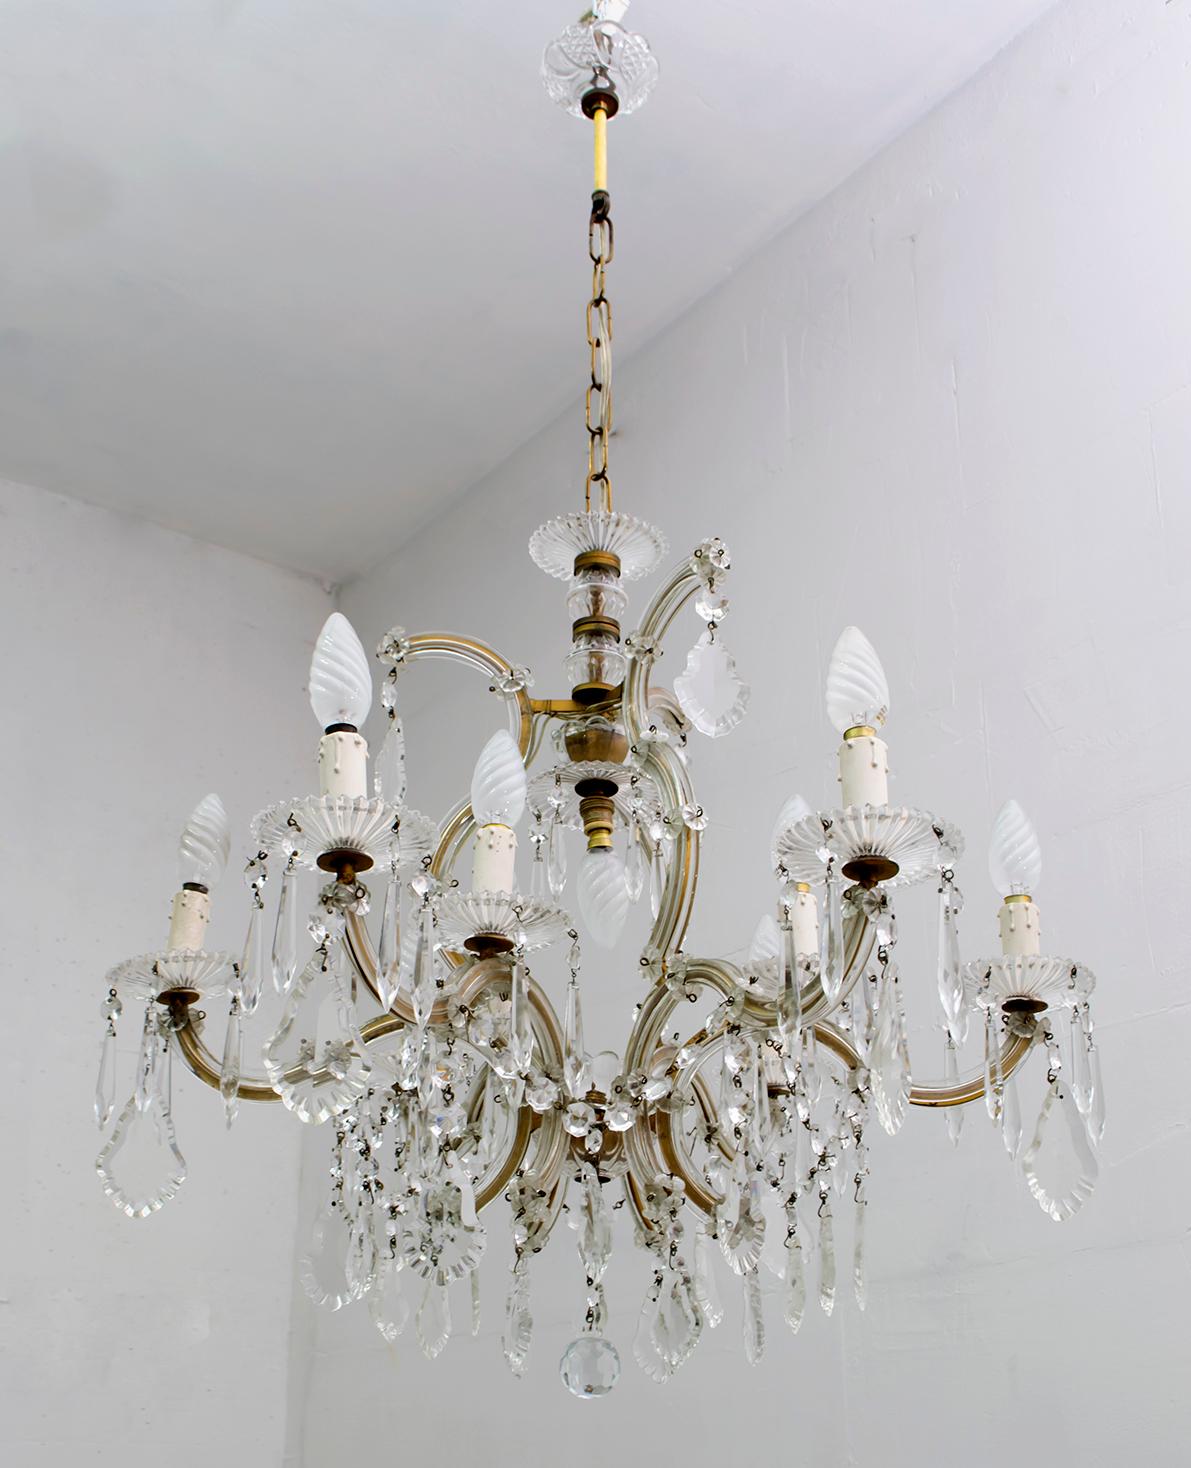 A delightful ten-light Maria Theresa chandelier in Italian crystal and gilded metal with serpentine arms, each candle light with hanging pendants and decorative bobeches.
The chandelier measures 60 cm high without the chain.

